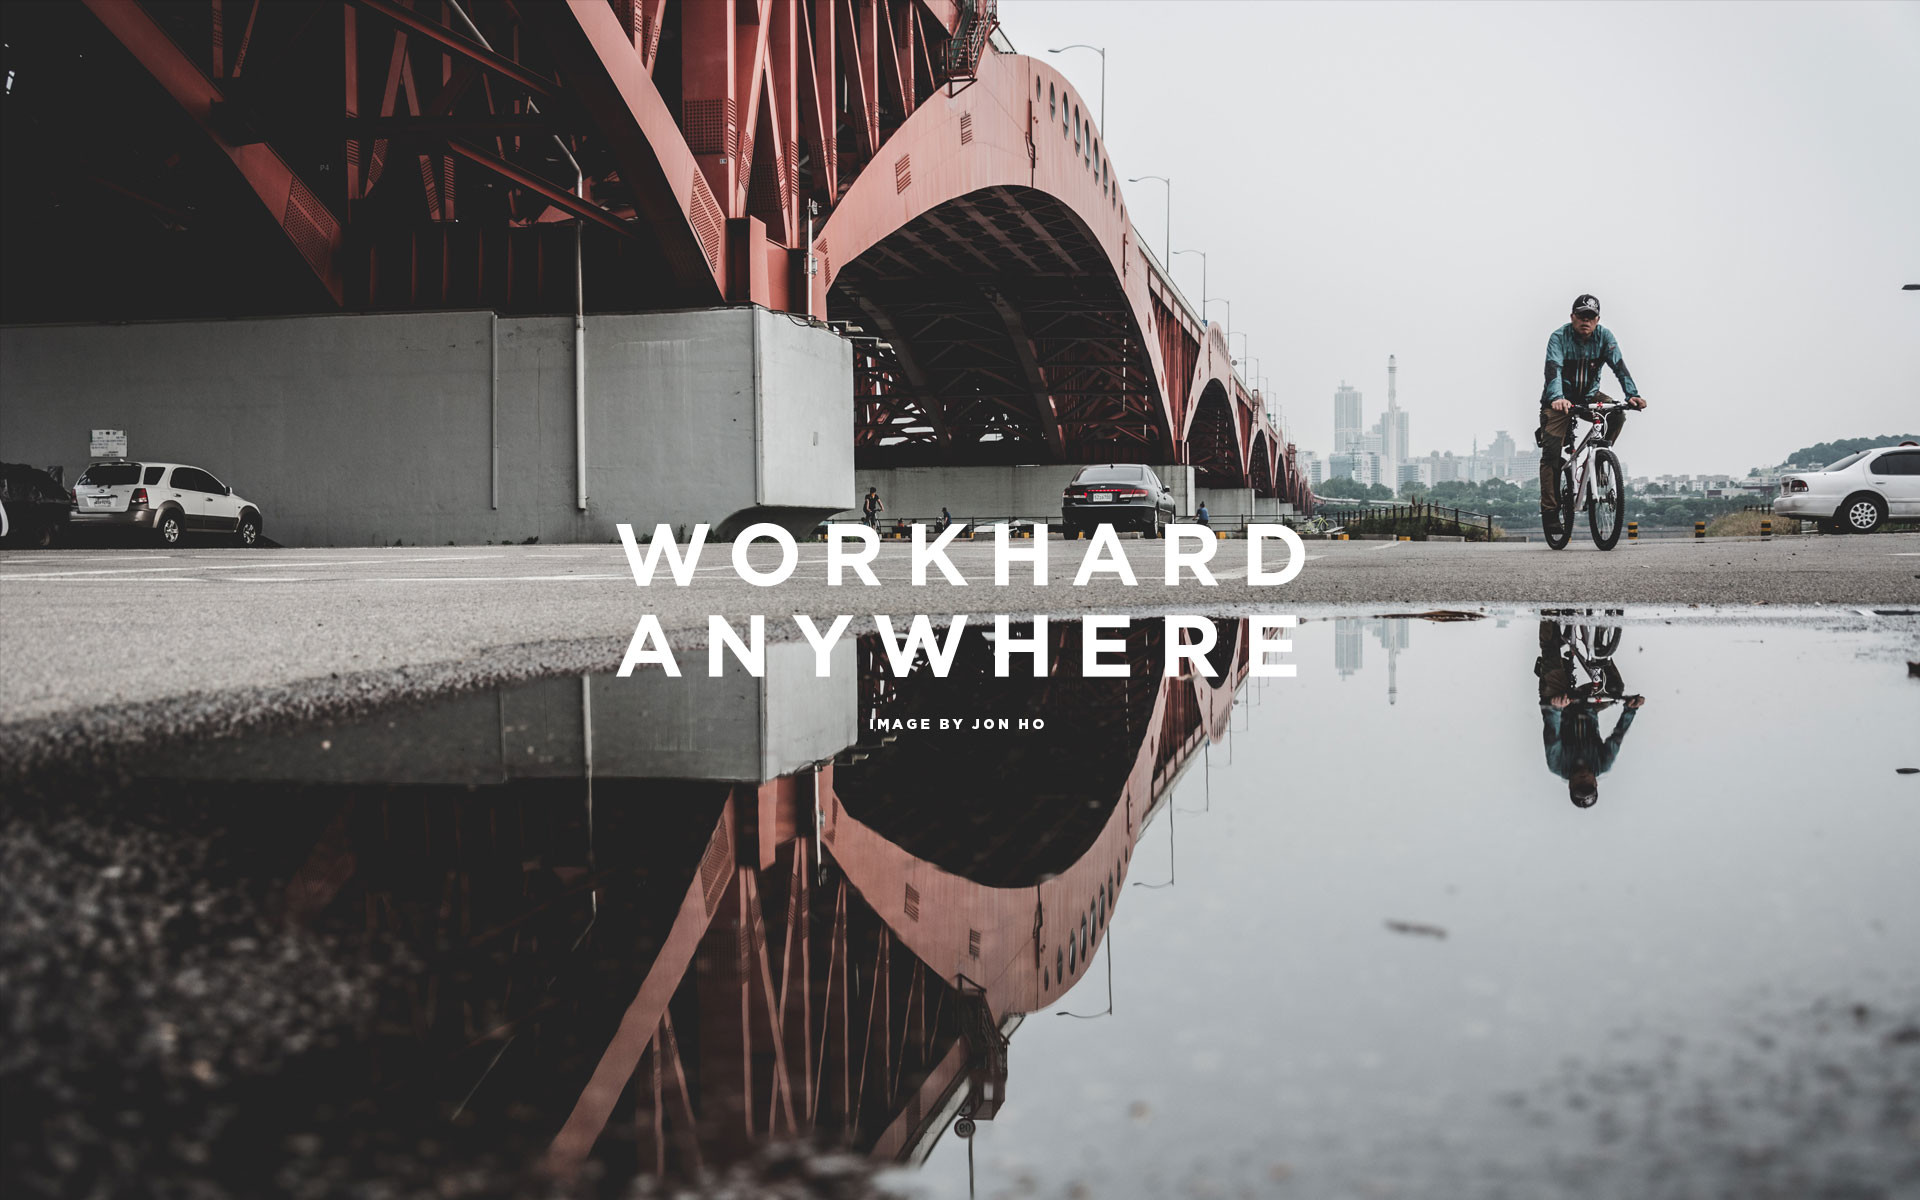 work hard anywhere wallpaper,font,reflection,photography,vehicle